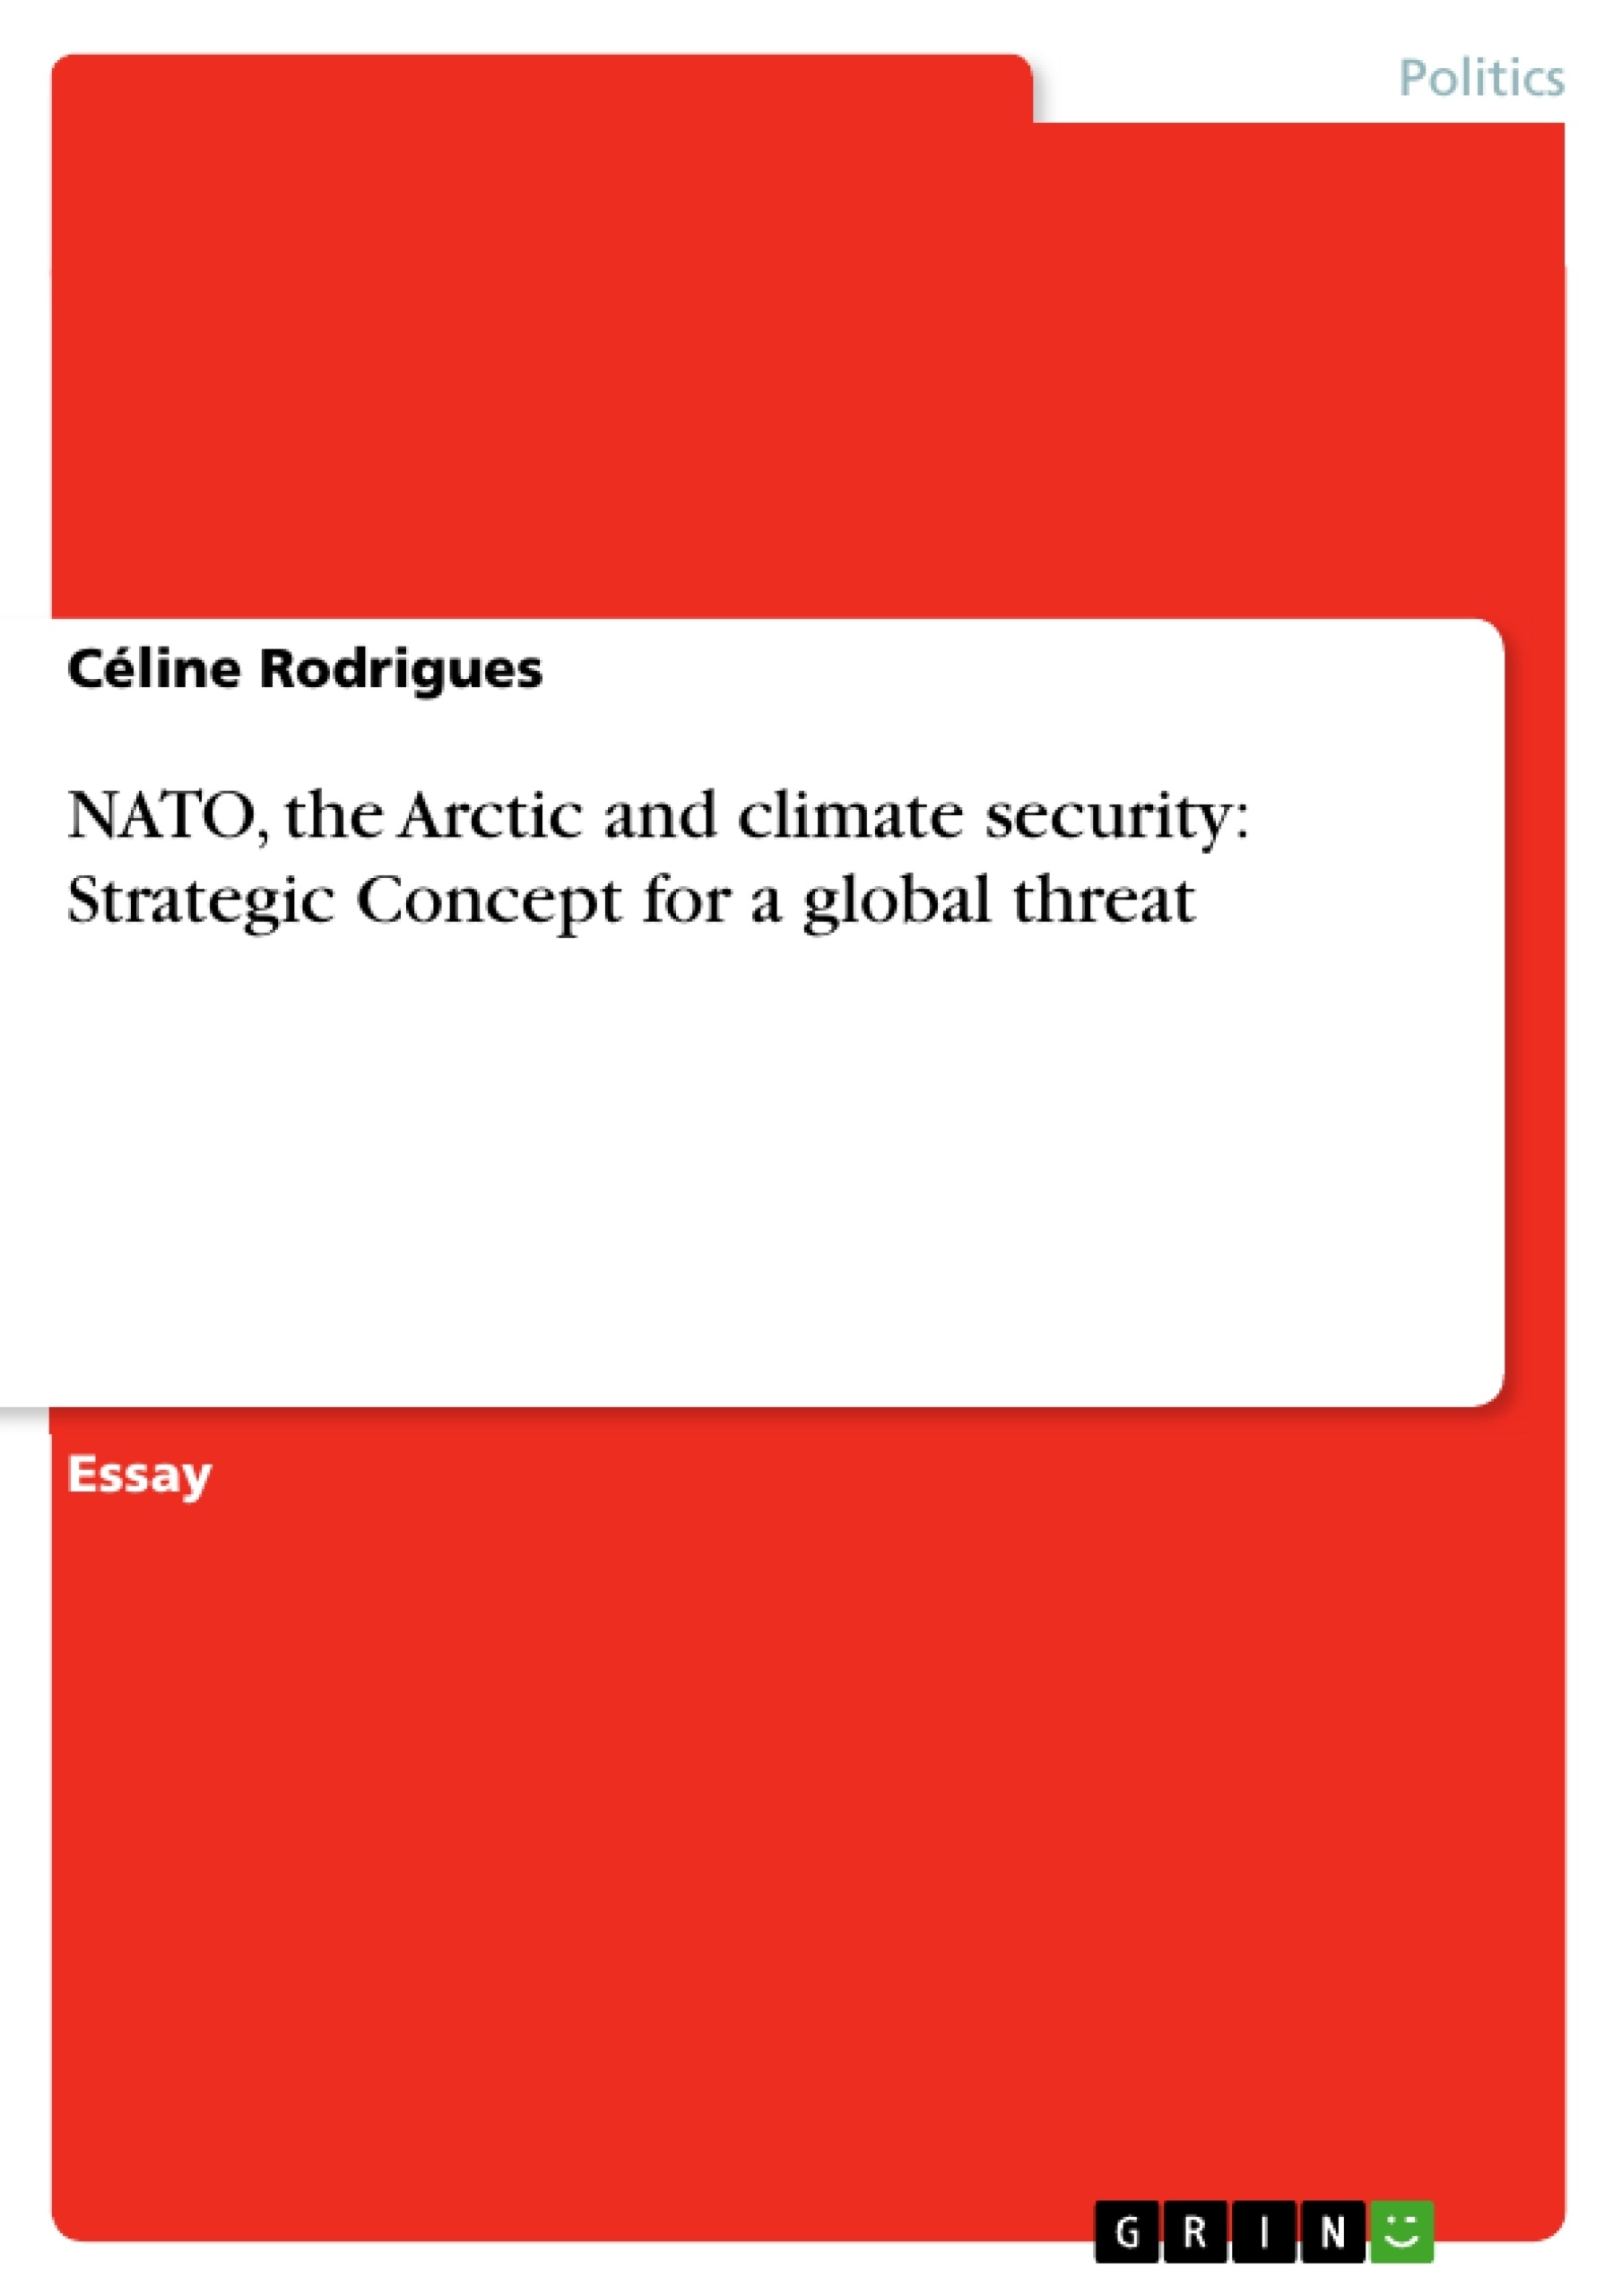 Title: NATO, the Arctic and climate security: Strategic Concept for a global threat